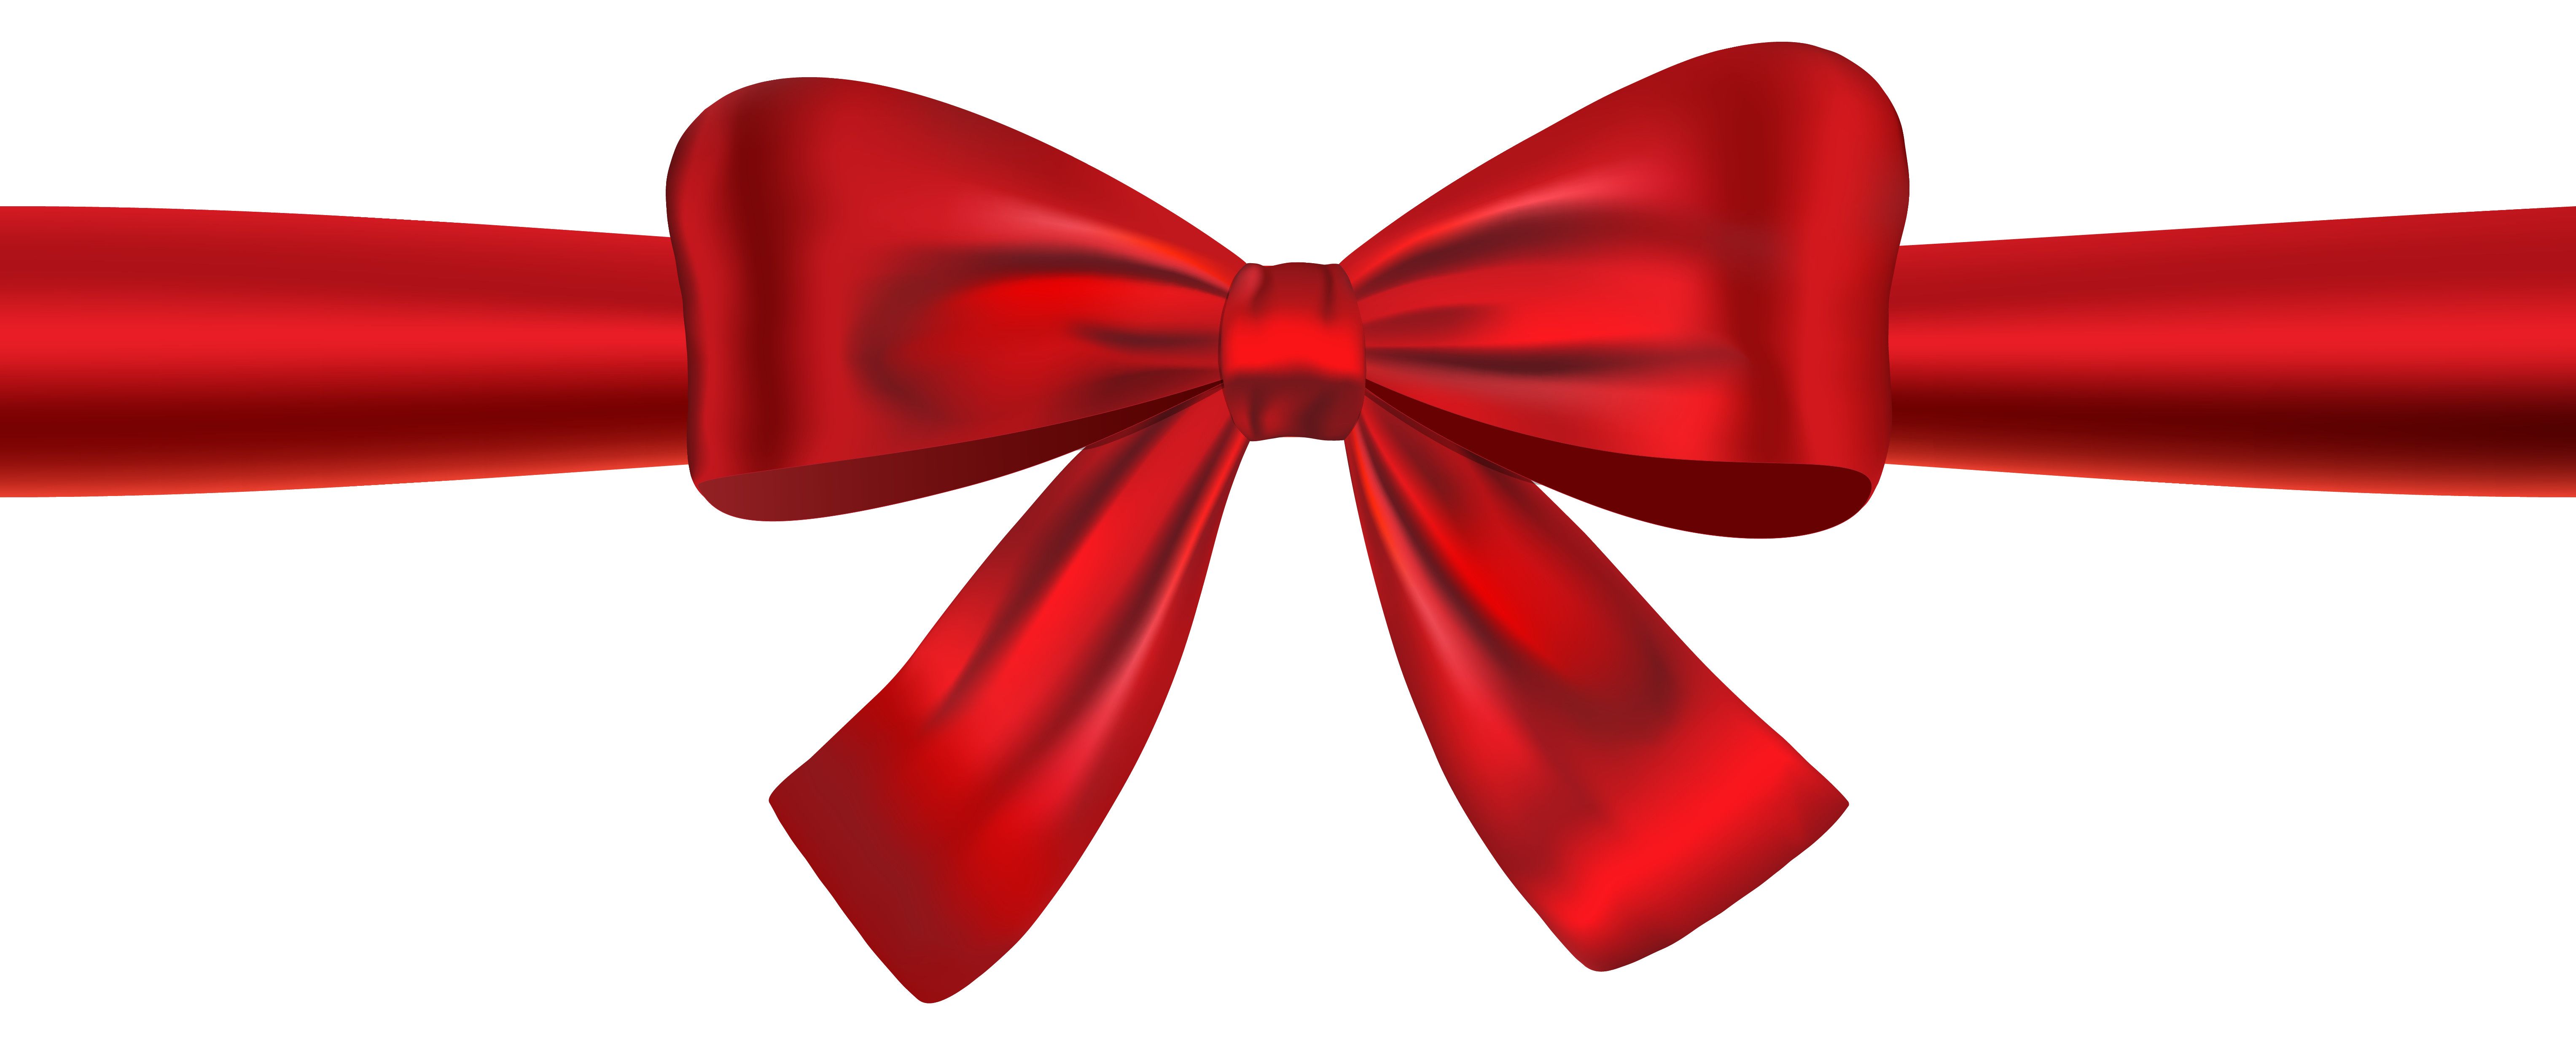 Clipart candy bow. Red ribbon and clippart